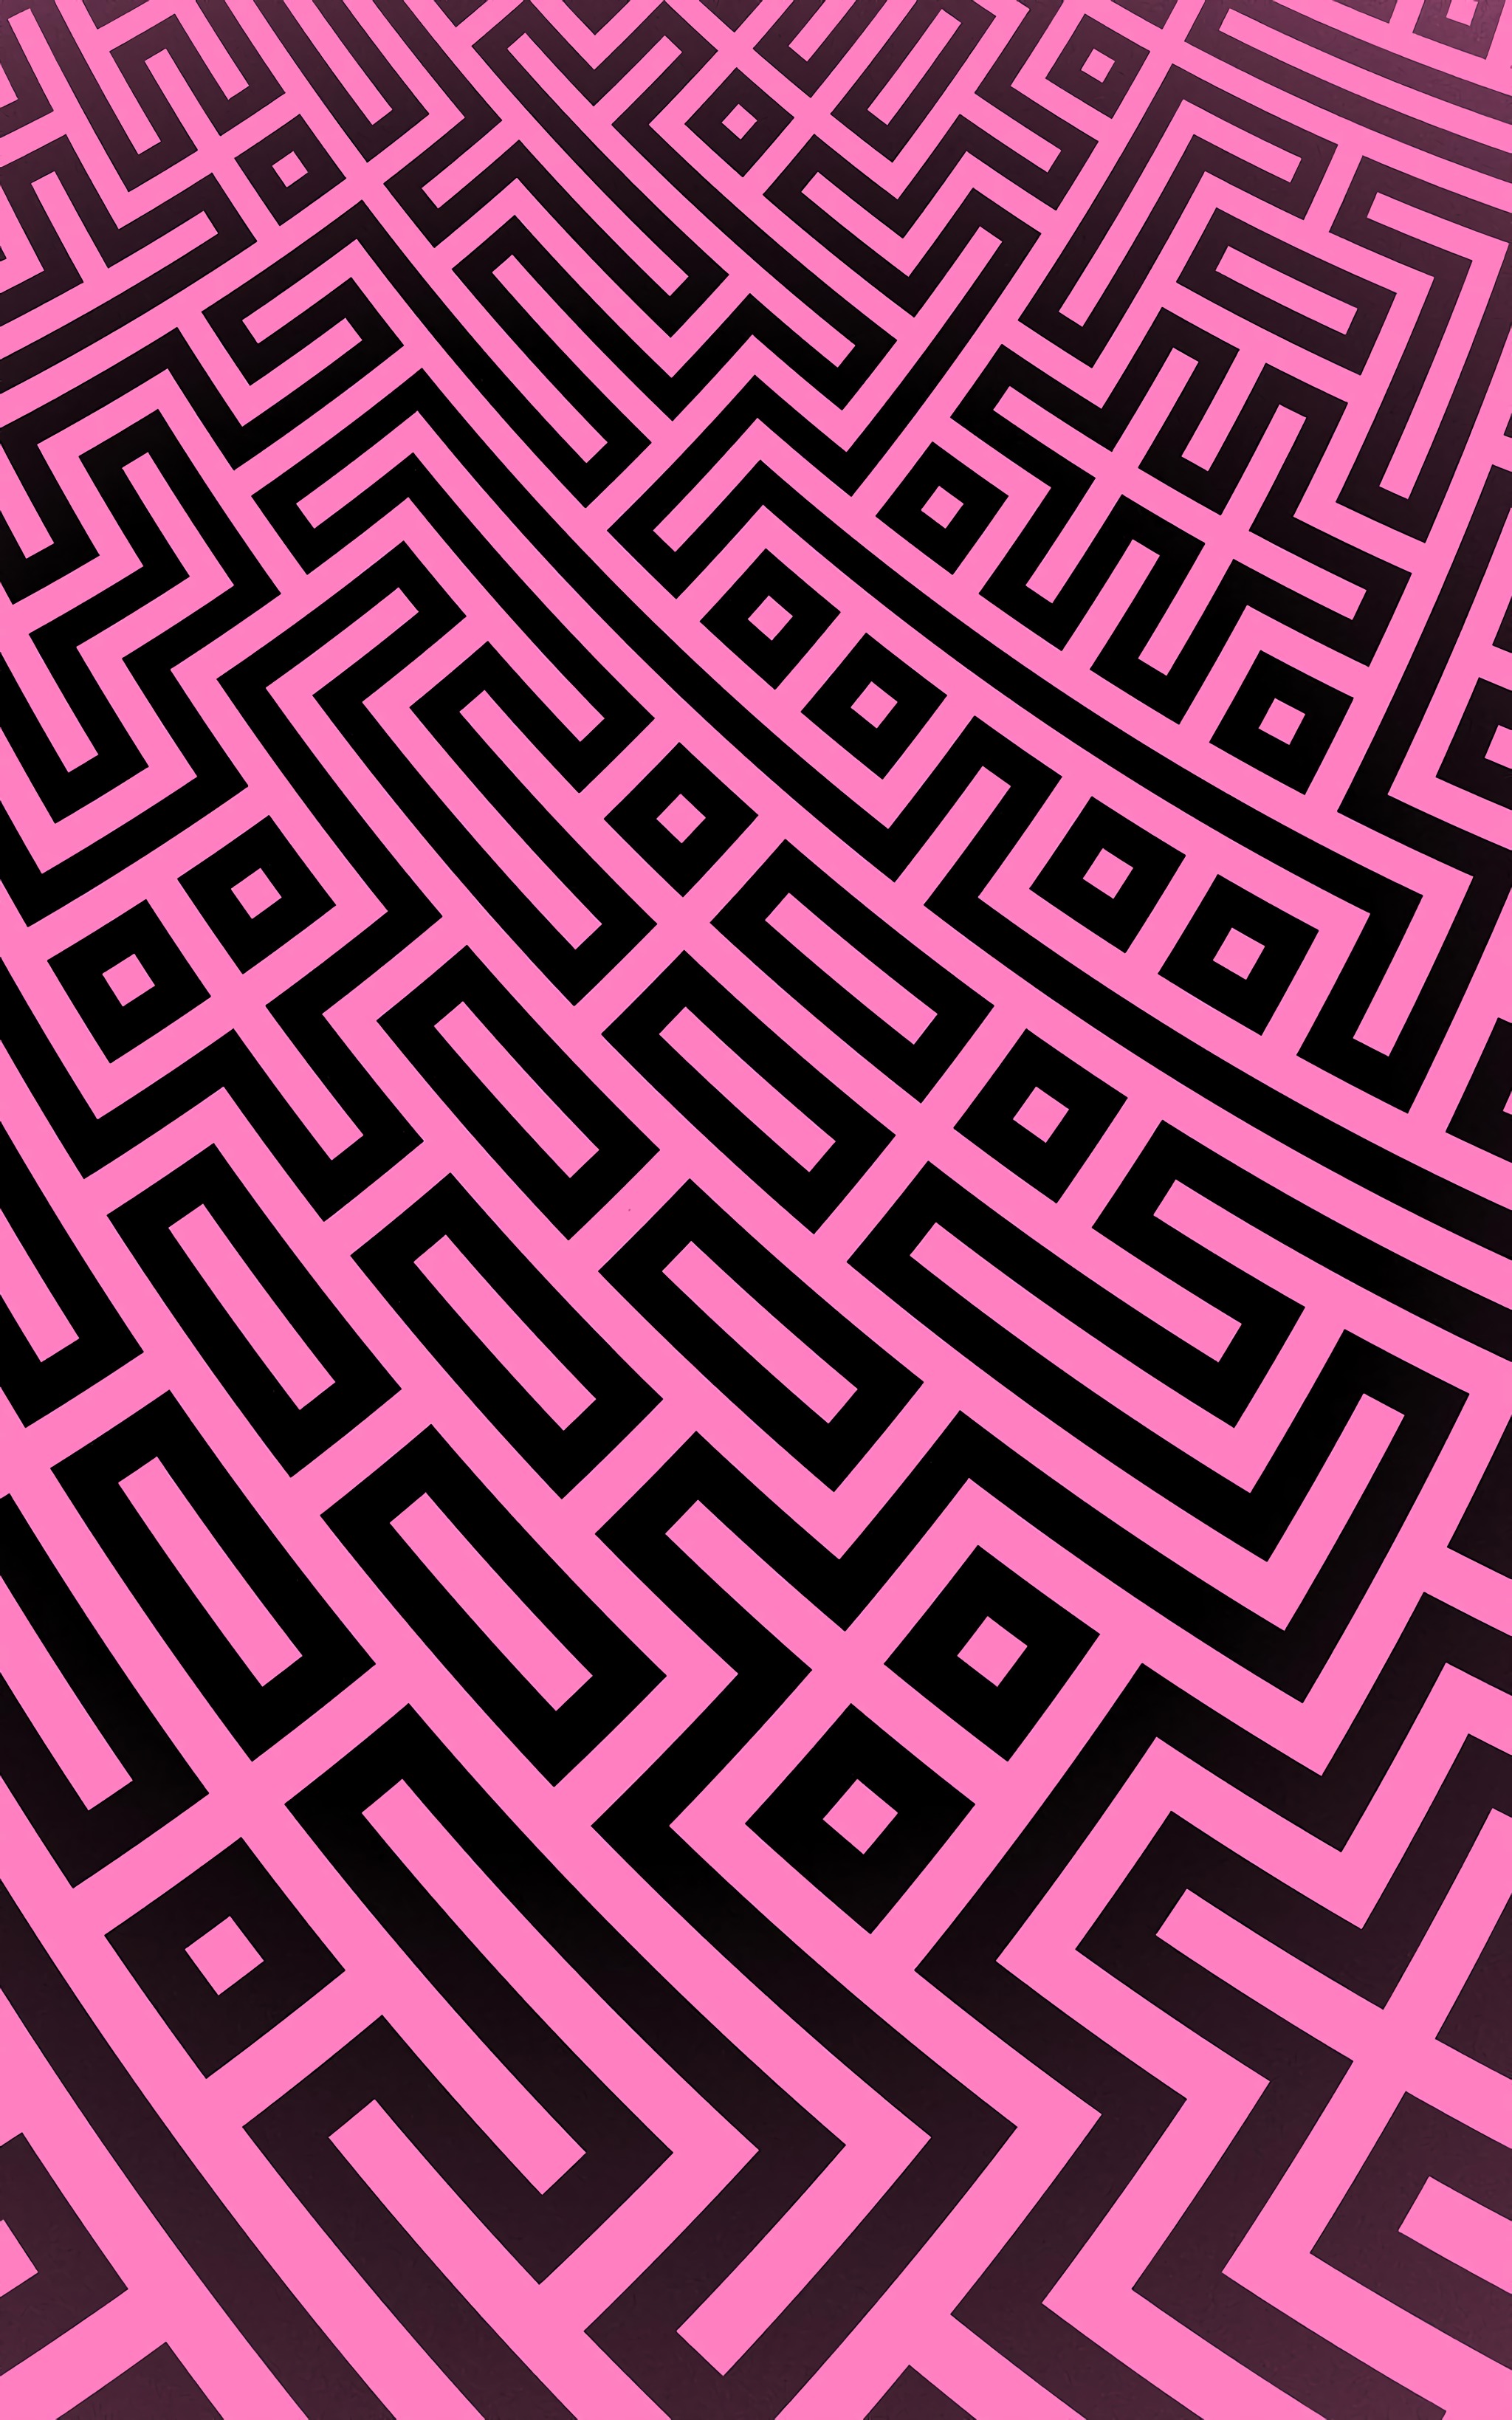 pink, lines, pattern, black, texture, textures, geometric images